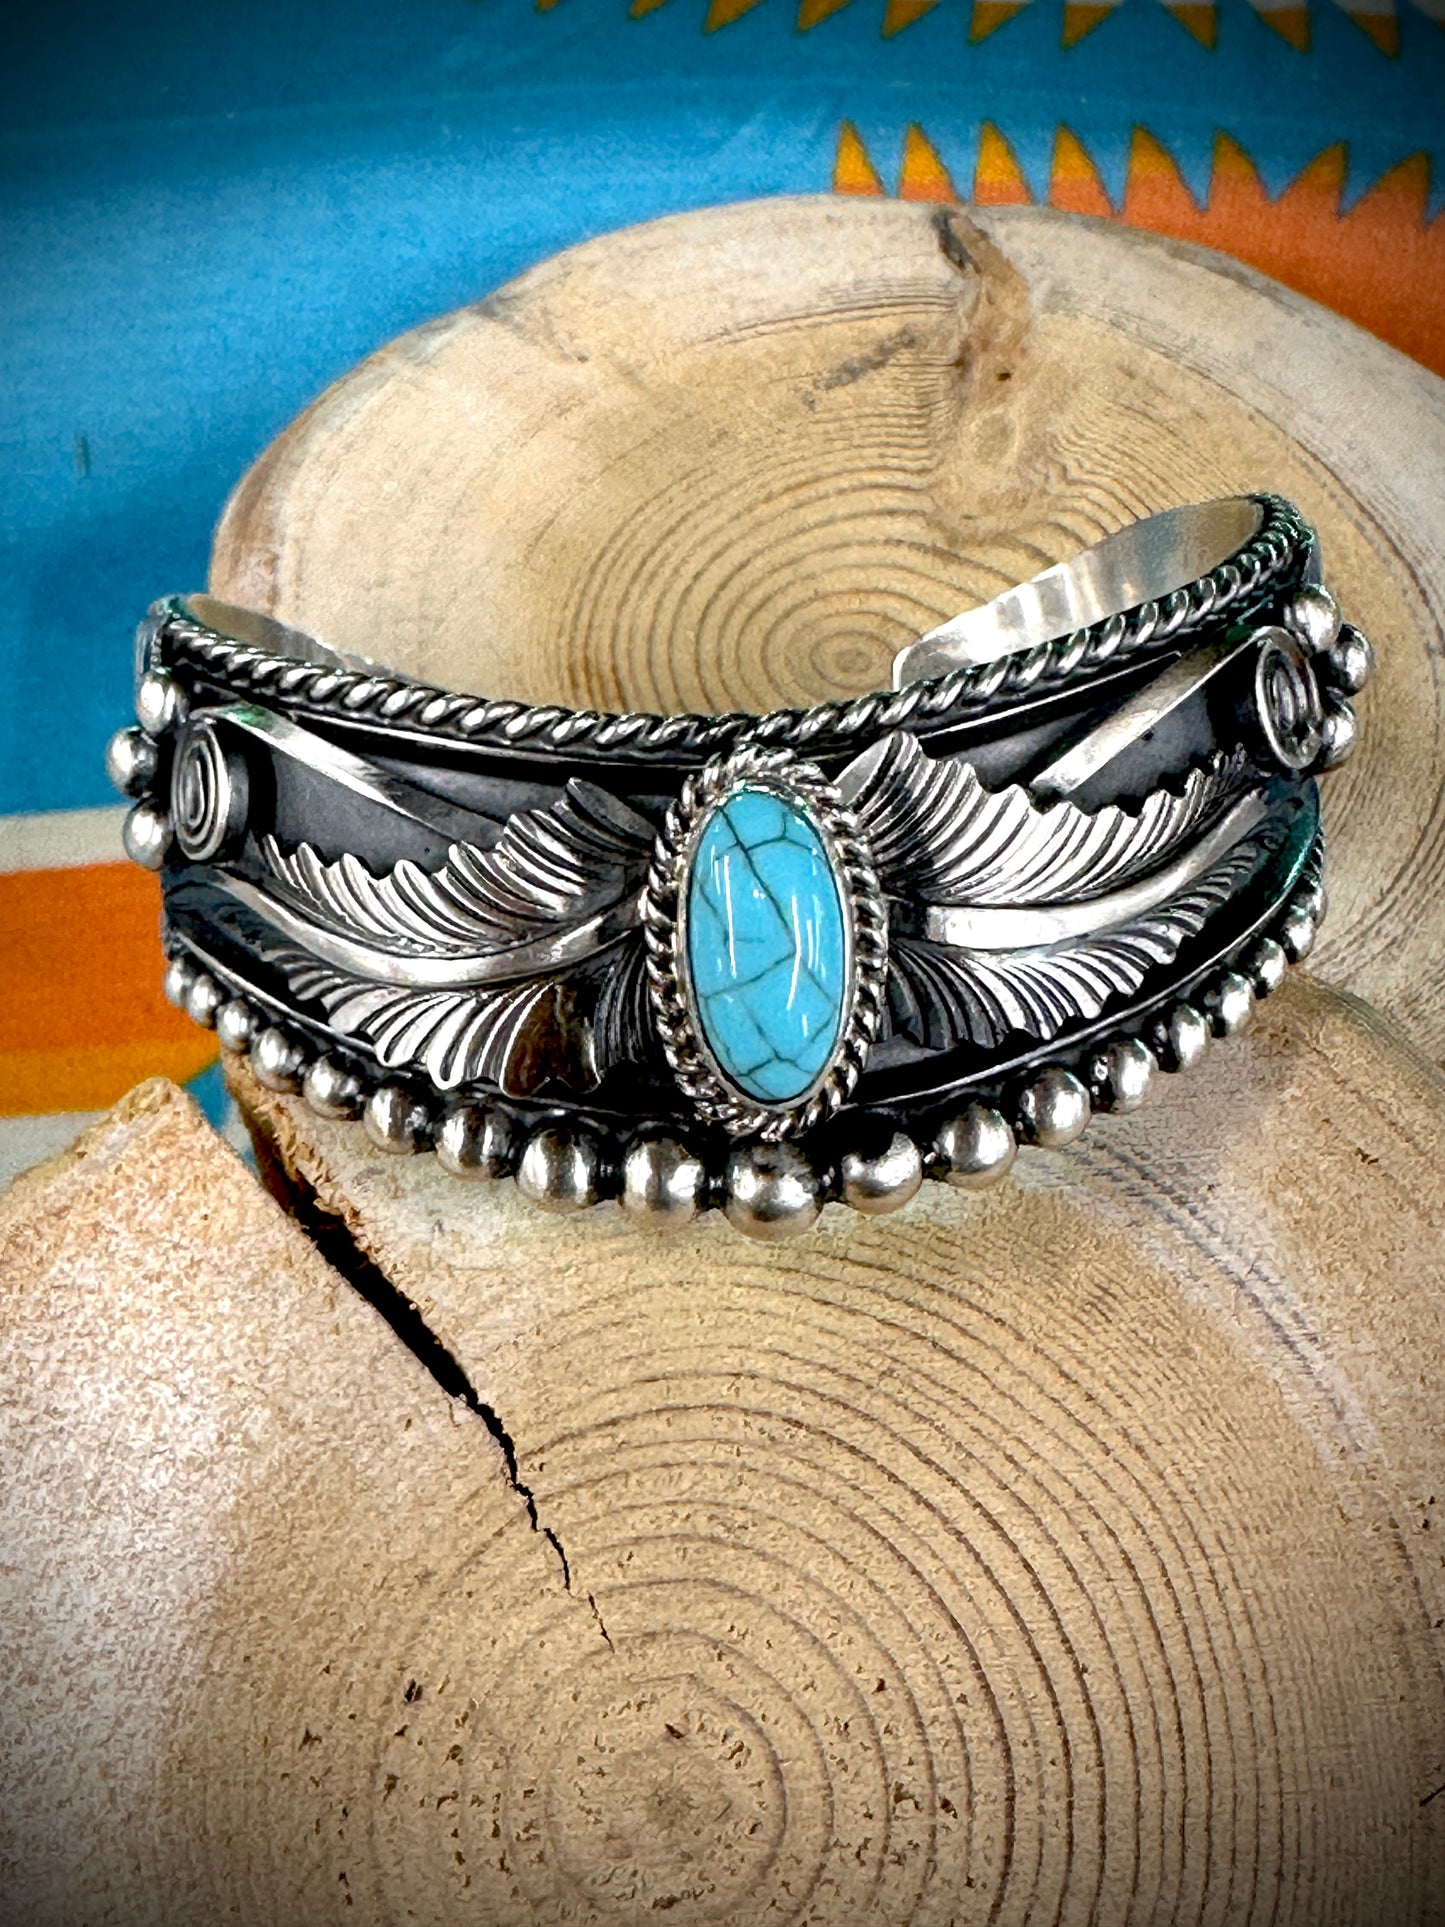 Frankly Speaking Turquoise Cuff